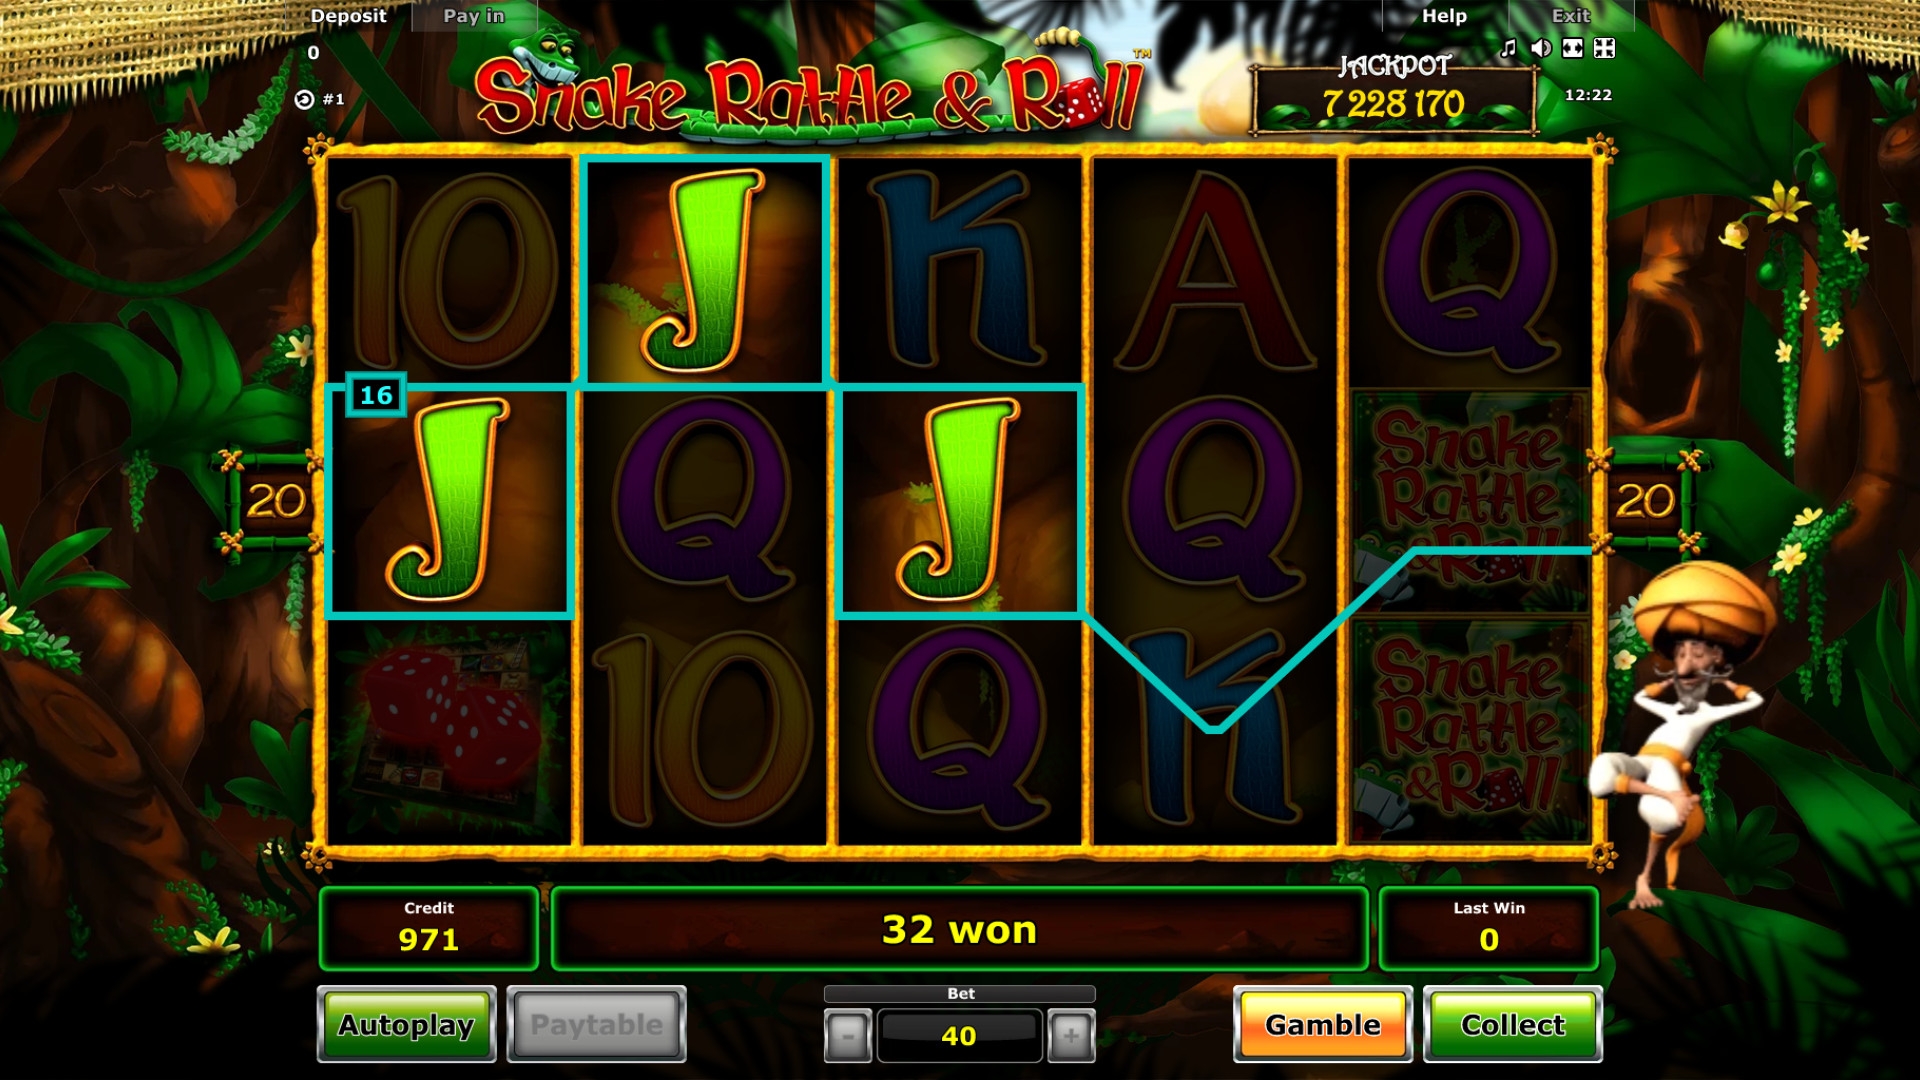 Snake Rattle & Roll Free Online Slots what casino app games can you win real money 